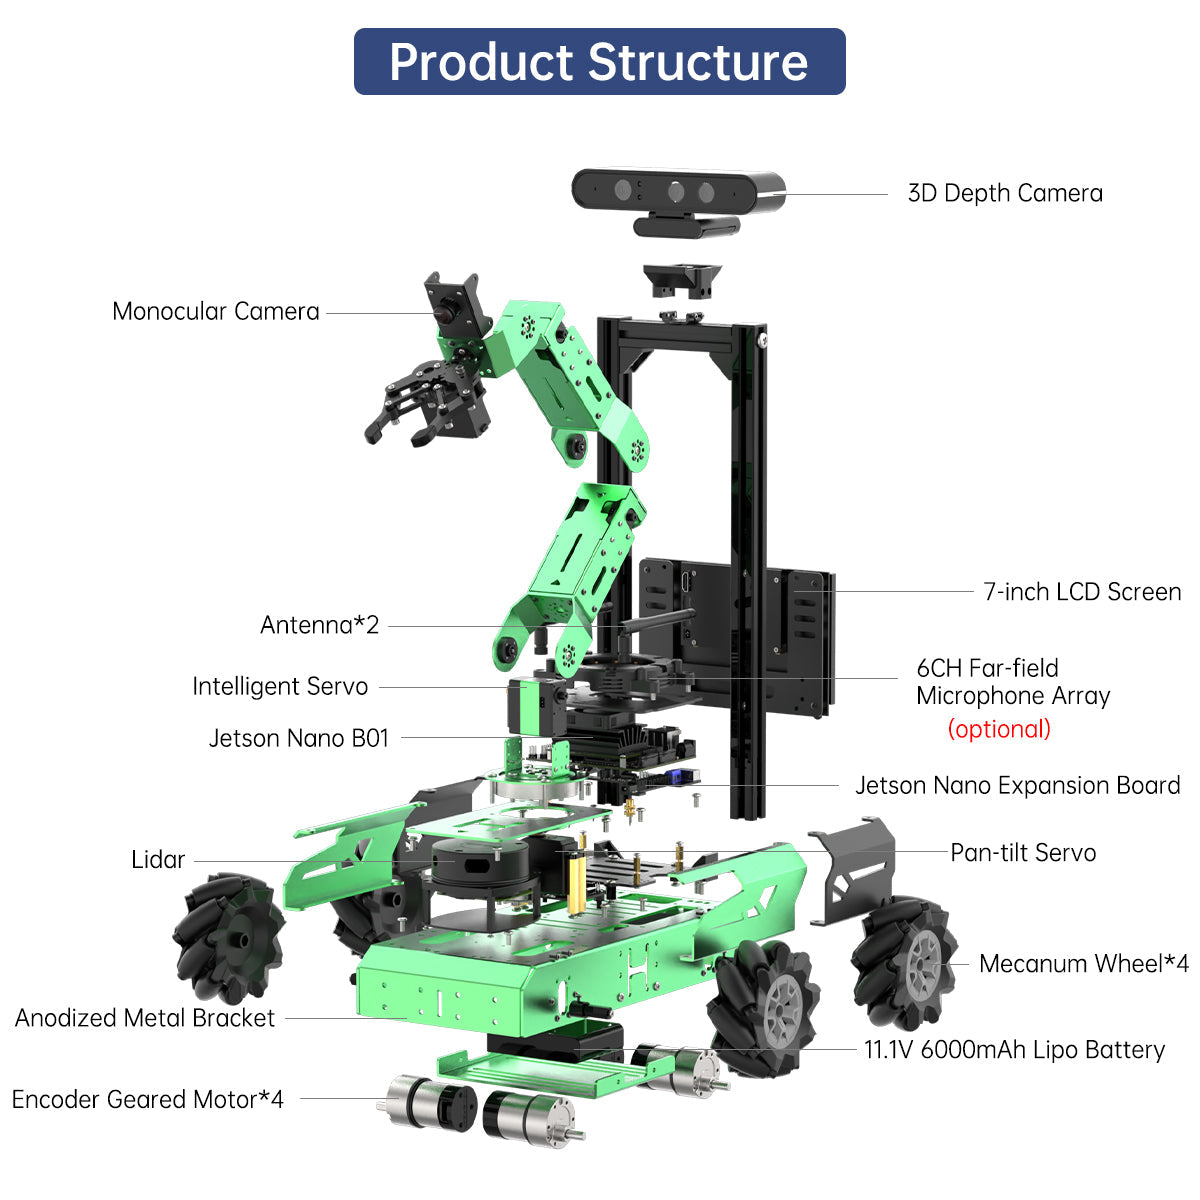 JetAuto Pro ROS Robot Car with Vision Robotic Arm Powered by Jetson Nano Support SLAM Mapping/ Navigation/ Python